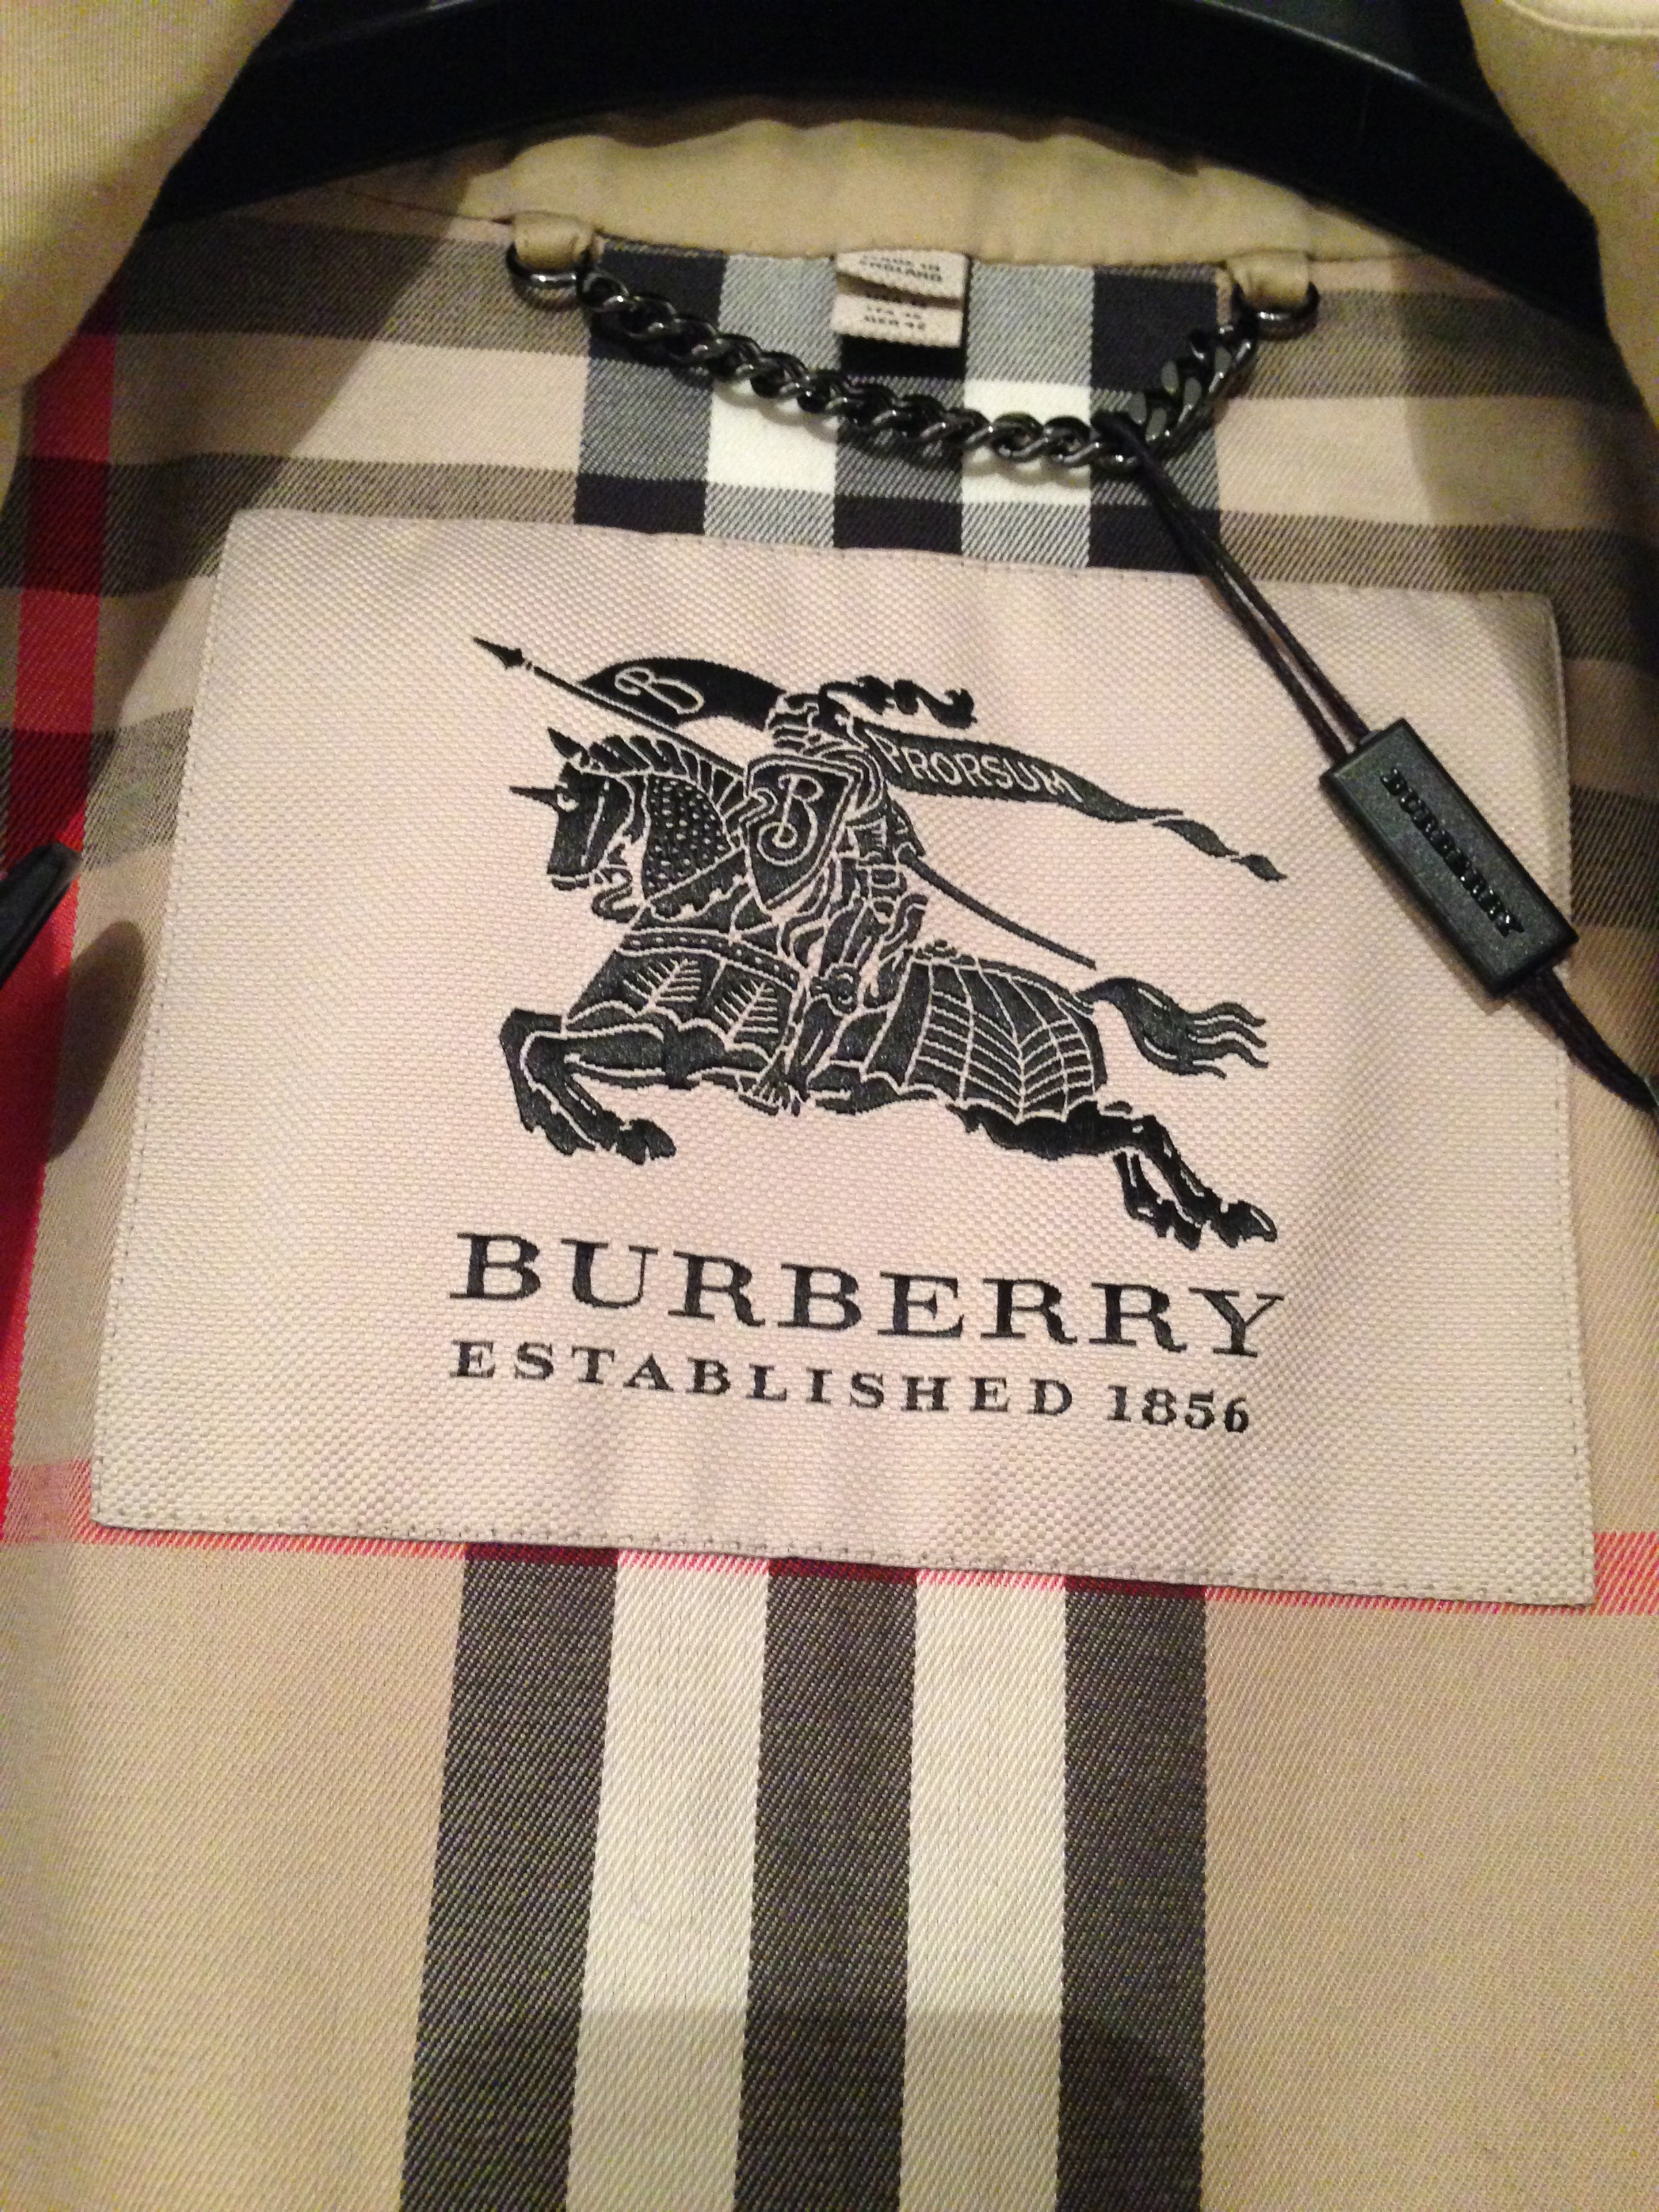 Burberry Bag Made In China | IUCN Water